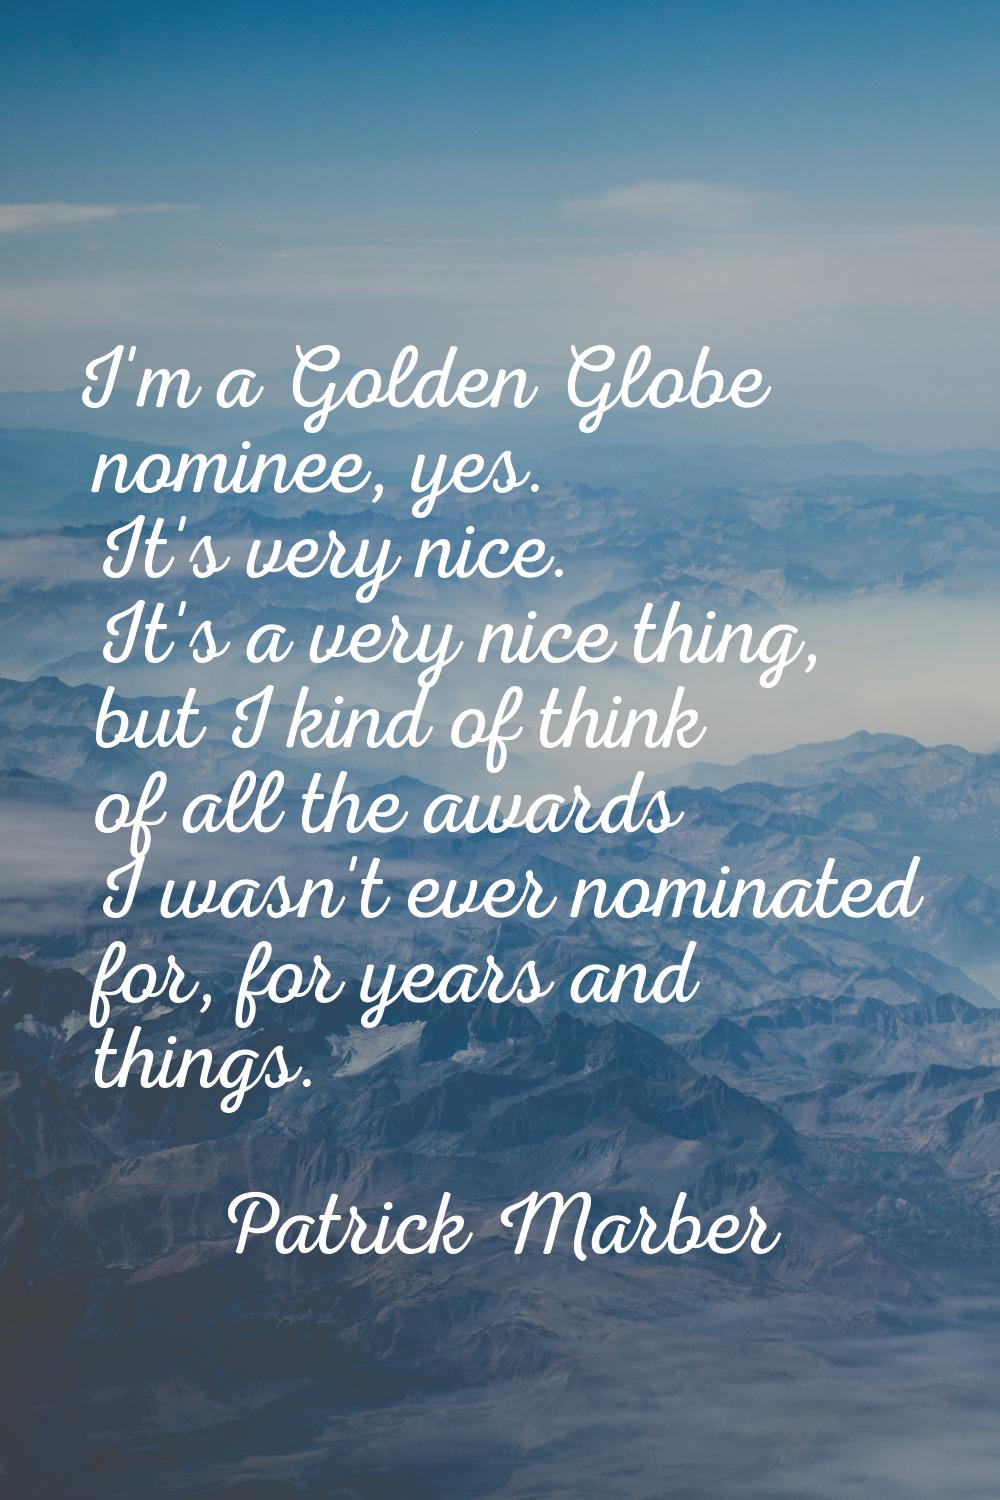 I'm a Golden Globe nominee, yes. It's very nice. It's a very nice thing, but I kind of think of all